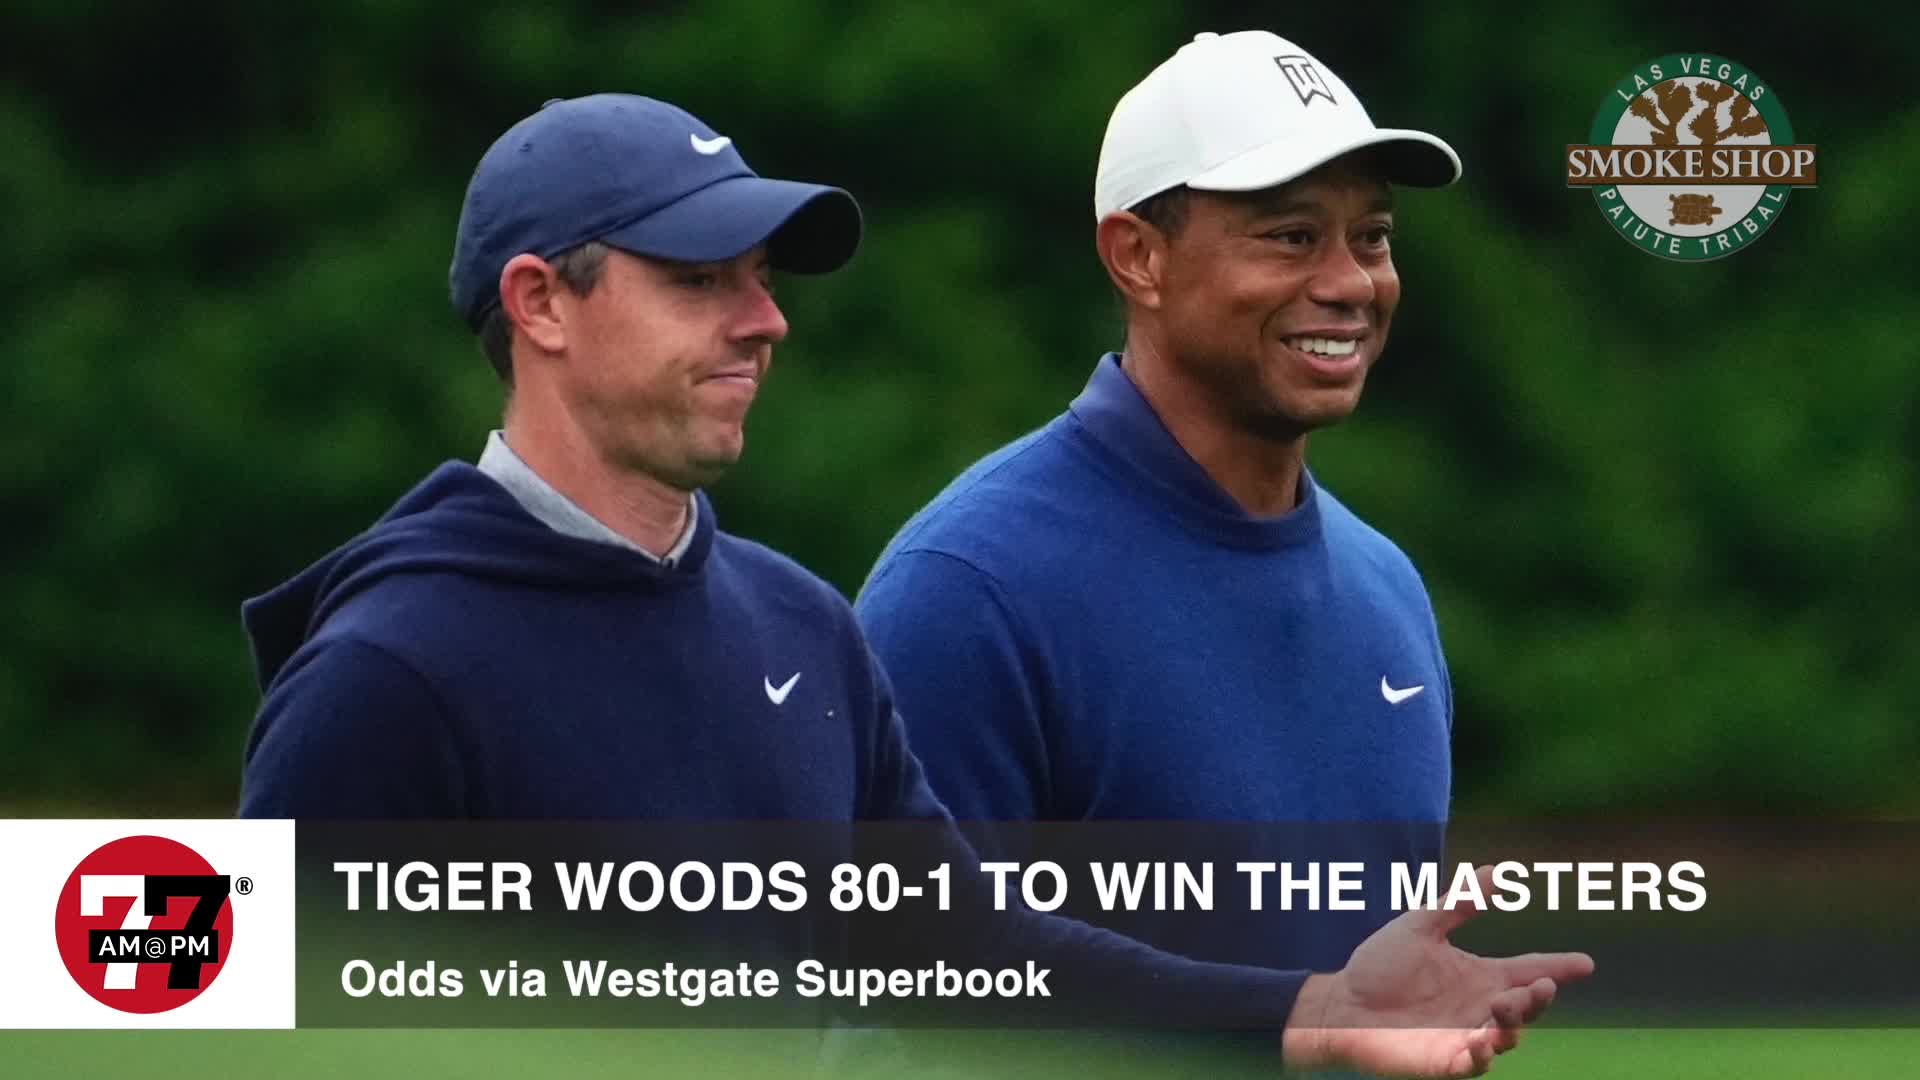 Will Woods make it: Yes -170 and no +150